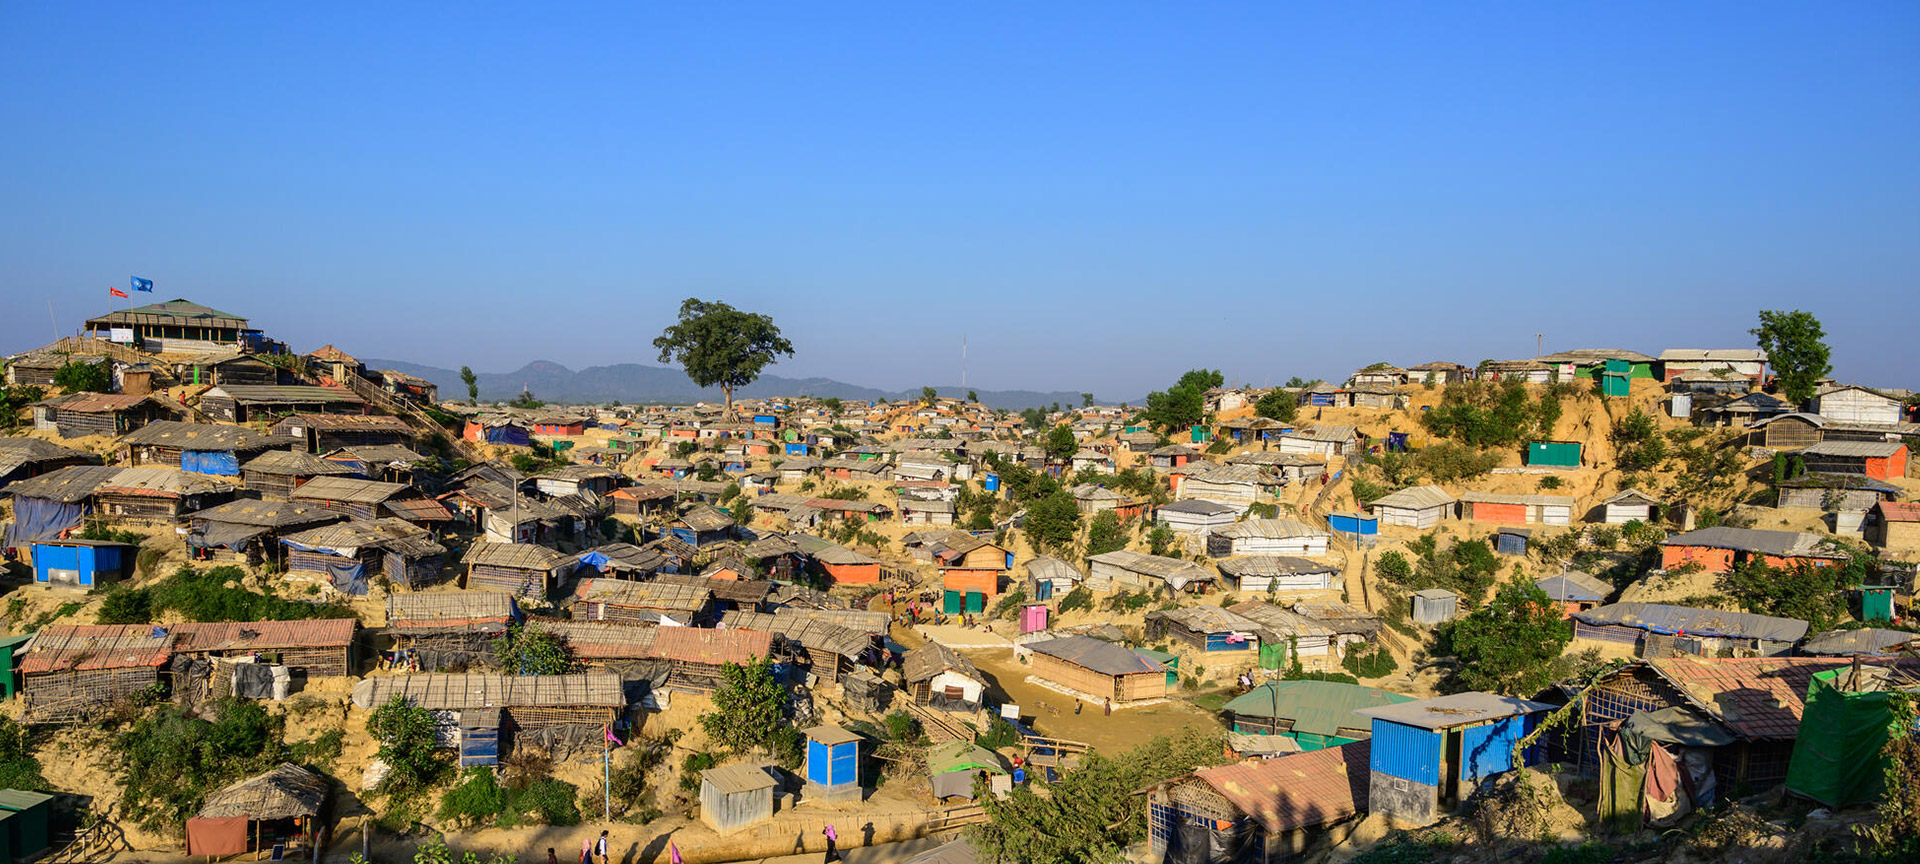 A birds-eye view of a hilltop village filled with small homes. 